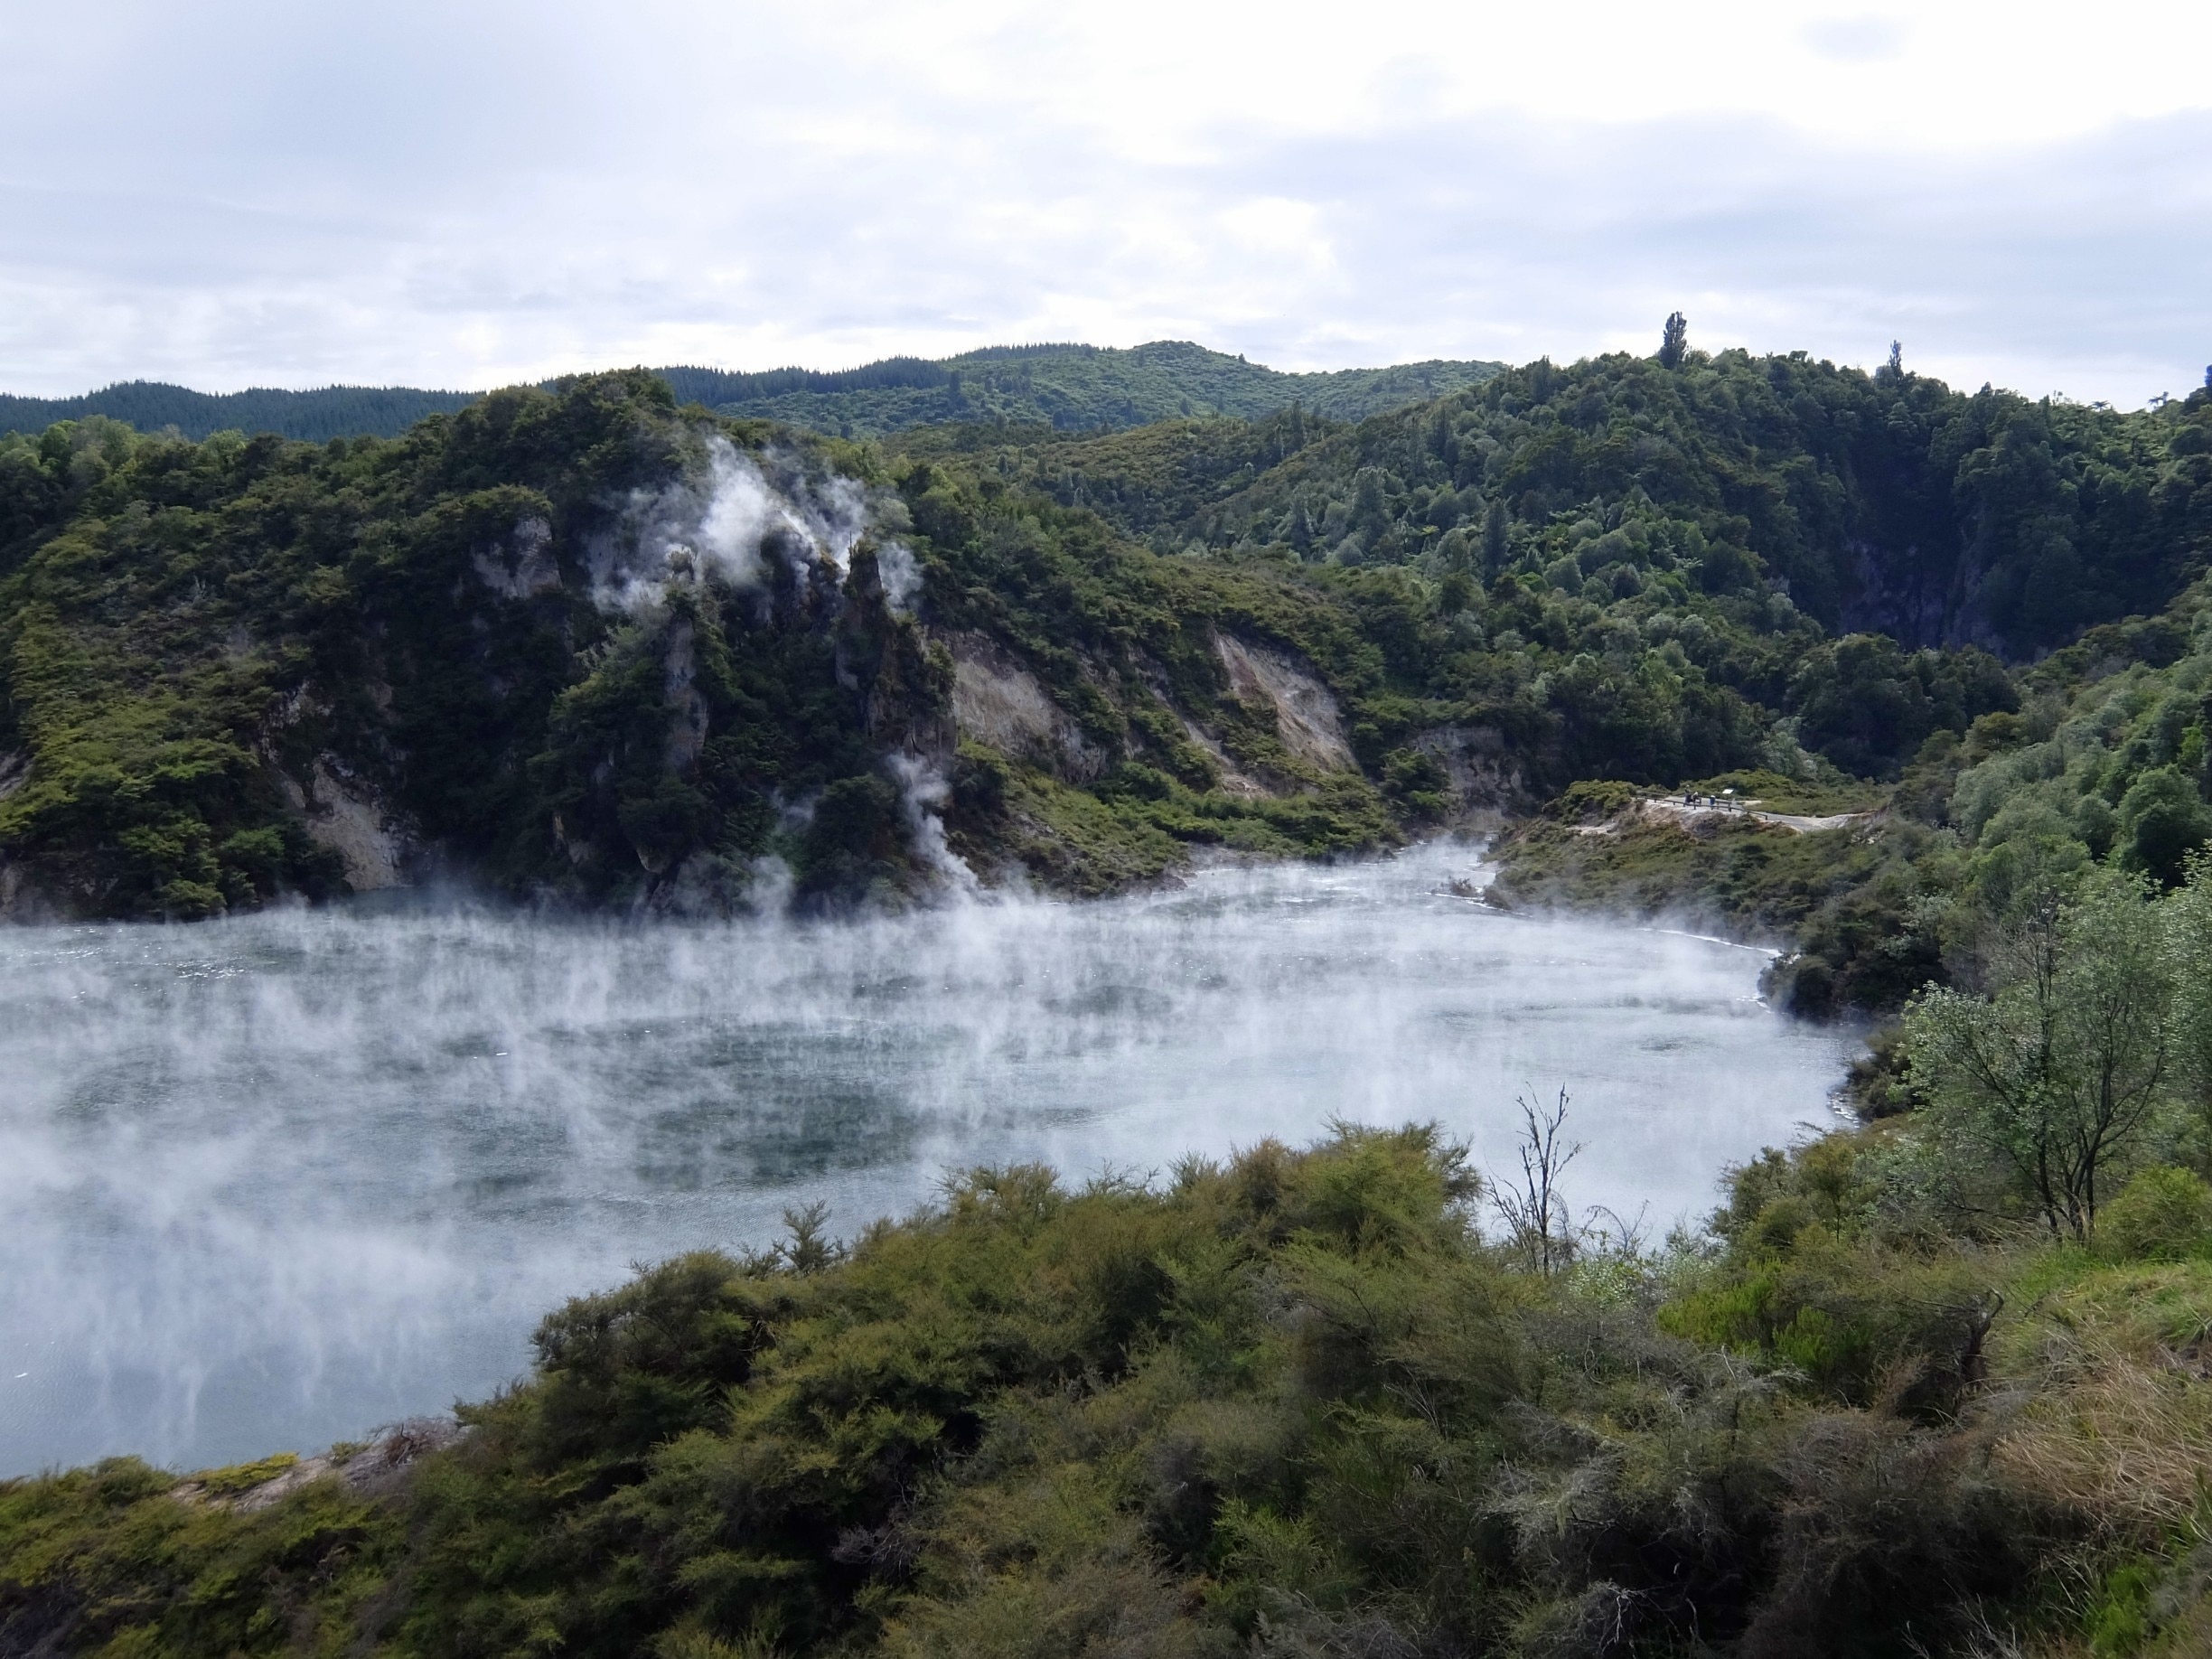 Waimangu Volcanic Valley is the youngest geothermal system in the world. Most people only visit Wai-O-Tapu, but I would definitely recommend visiting Waimangu as well, it's totally different and a lot greener.